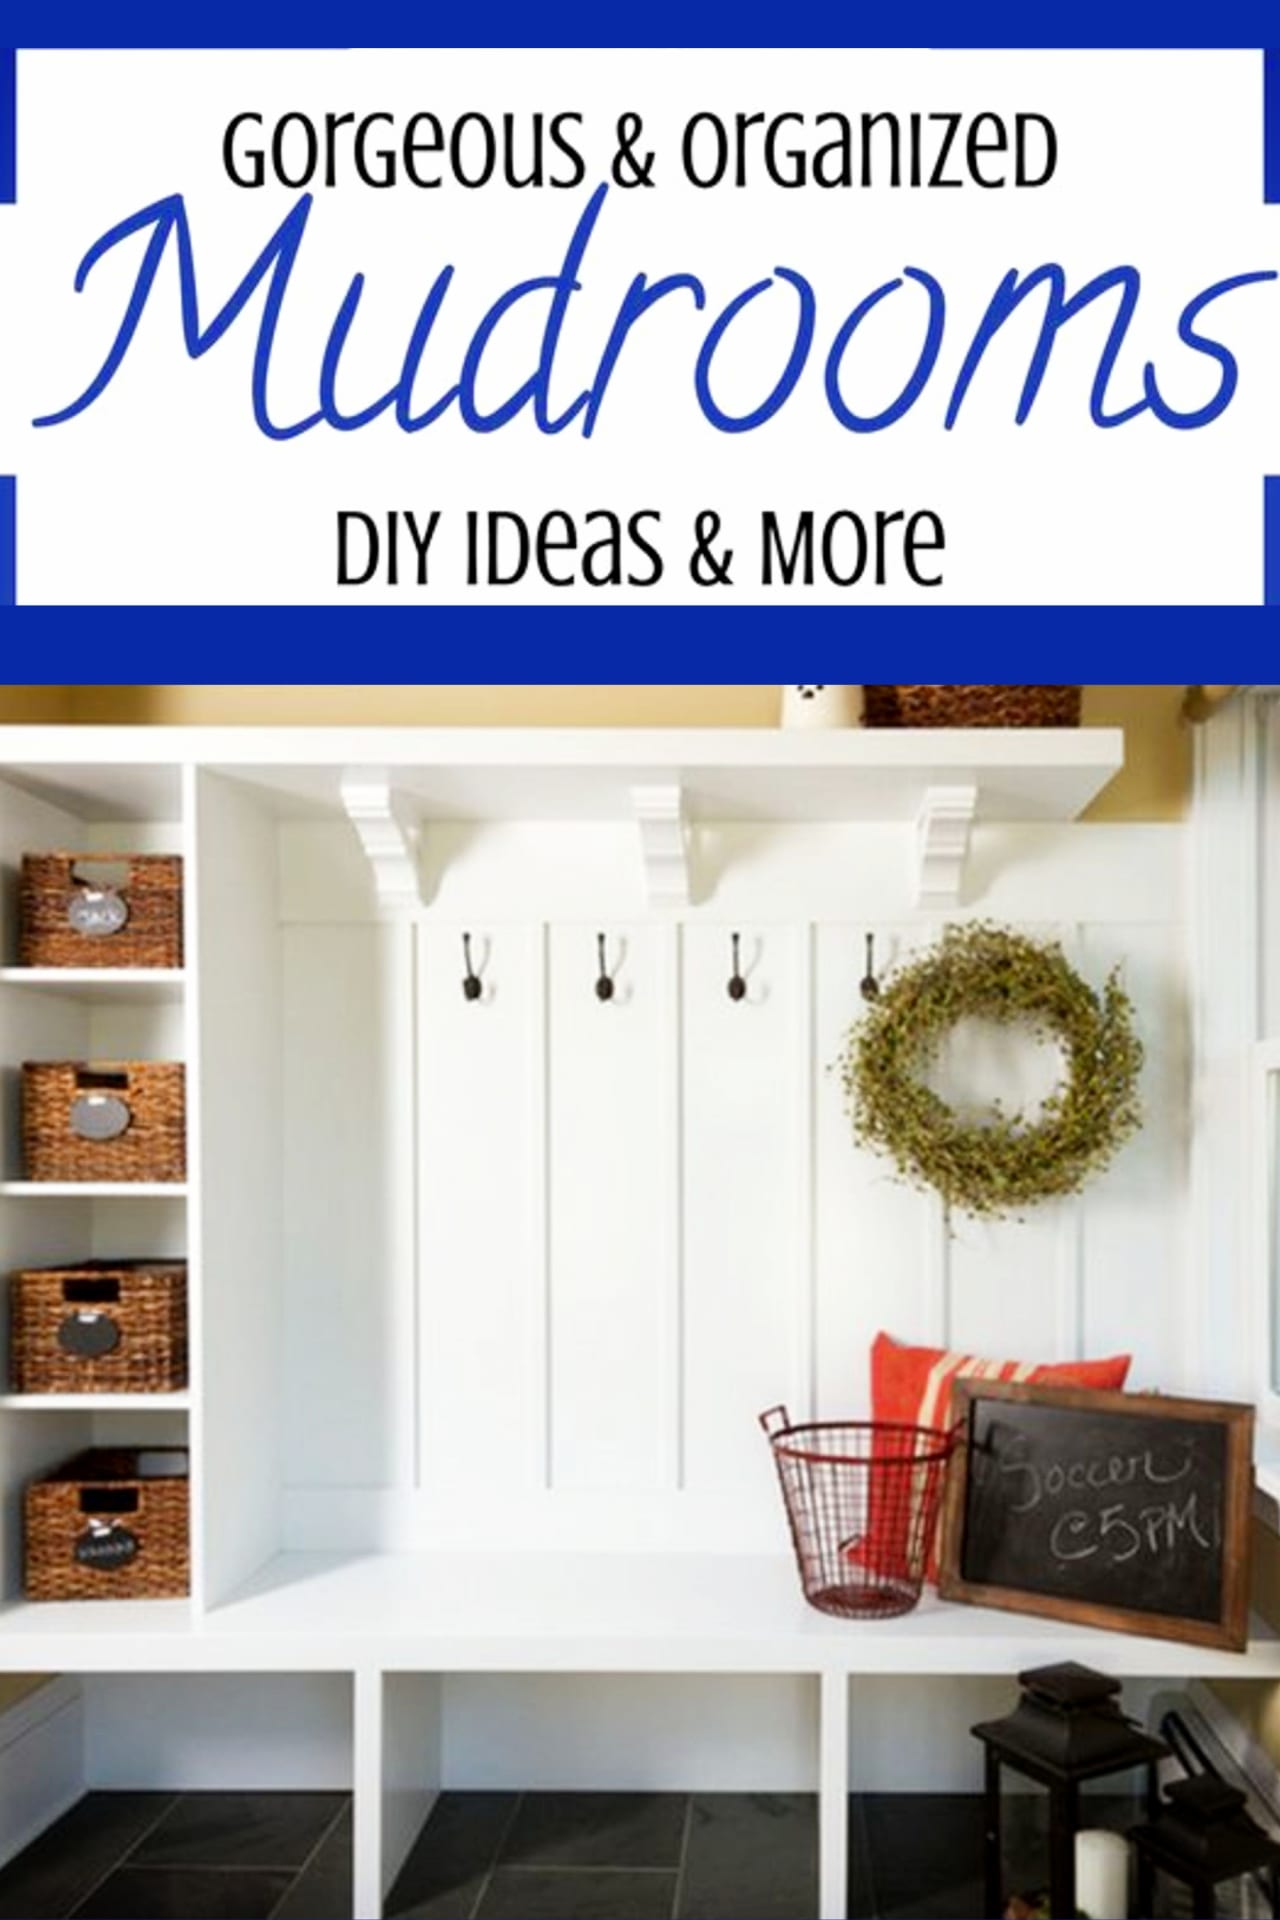 Mudroom Ideas - Rustic farmhouse DIY mudroom designs and mud rooms ideas we love… mudroom cubbies, cabinets, baskets, mudroom organization ideas and of course, mudroom benches, too. What great ideas for a mud room in your home.